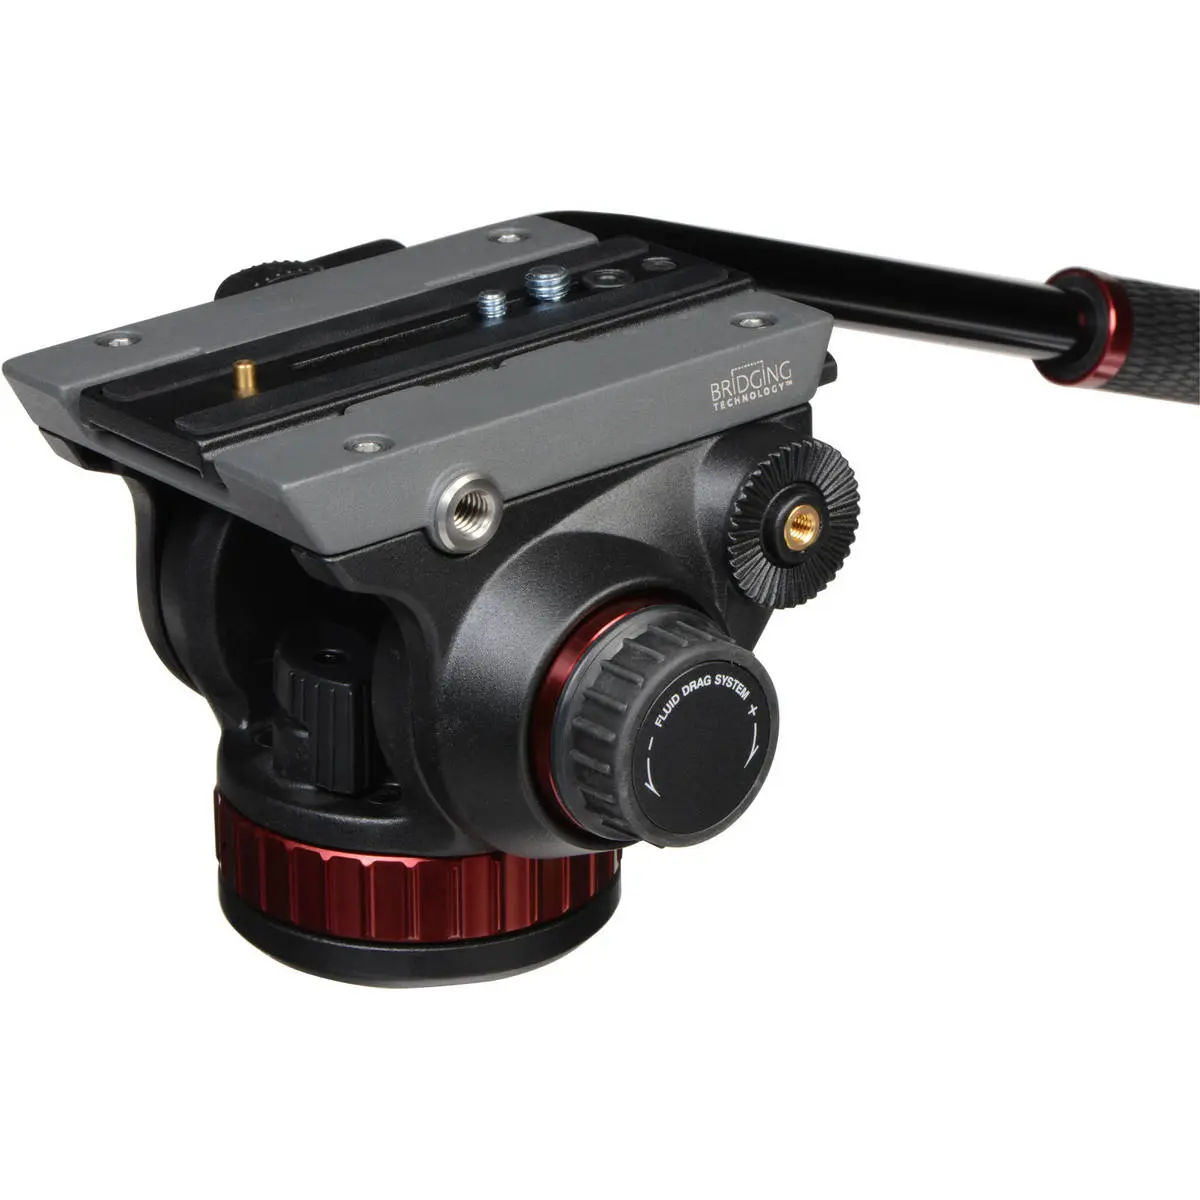 2. Manfrotto MVH502AH Pro Video Head with Flat Base